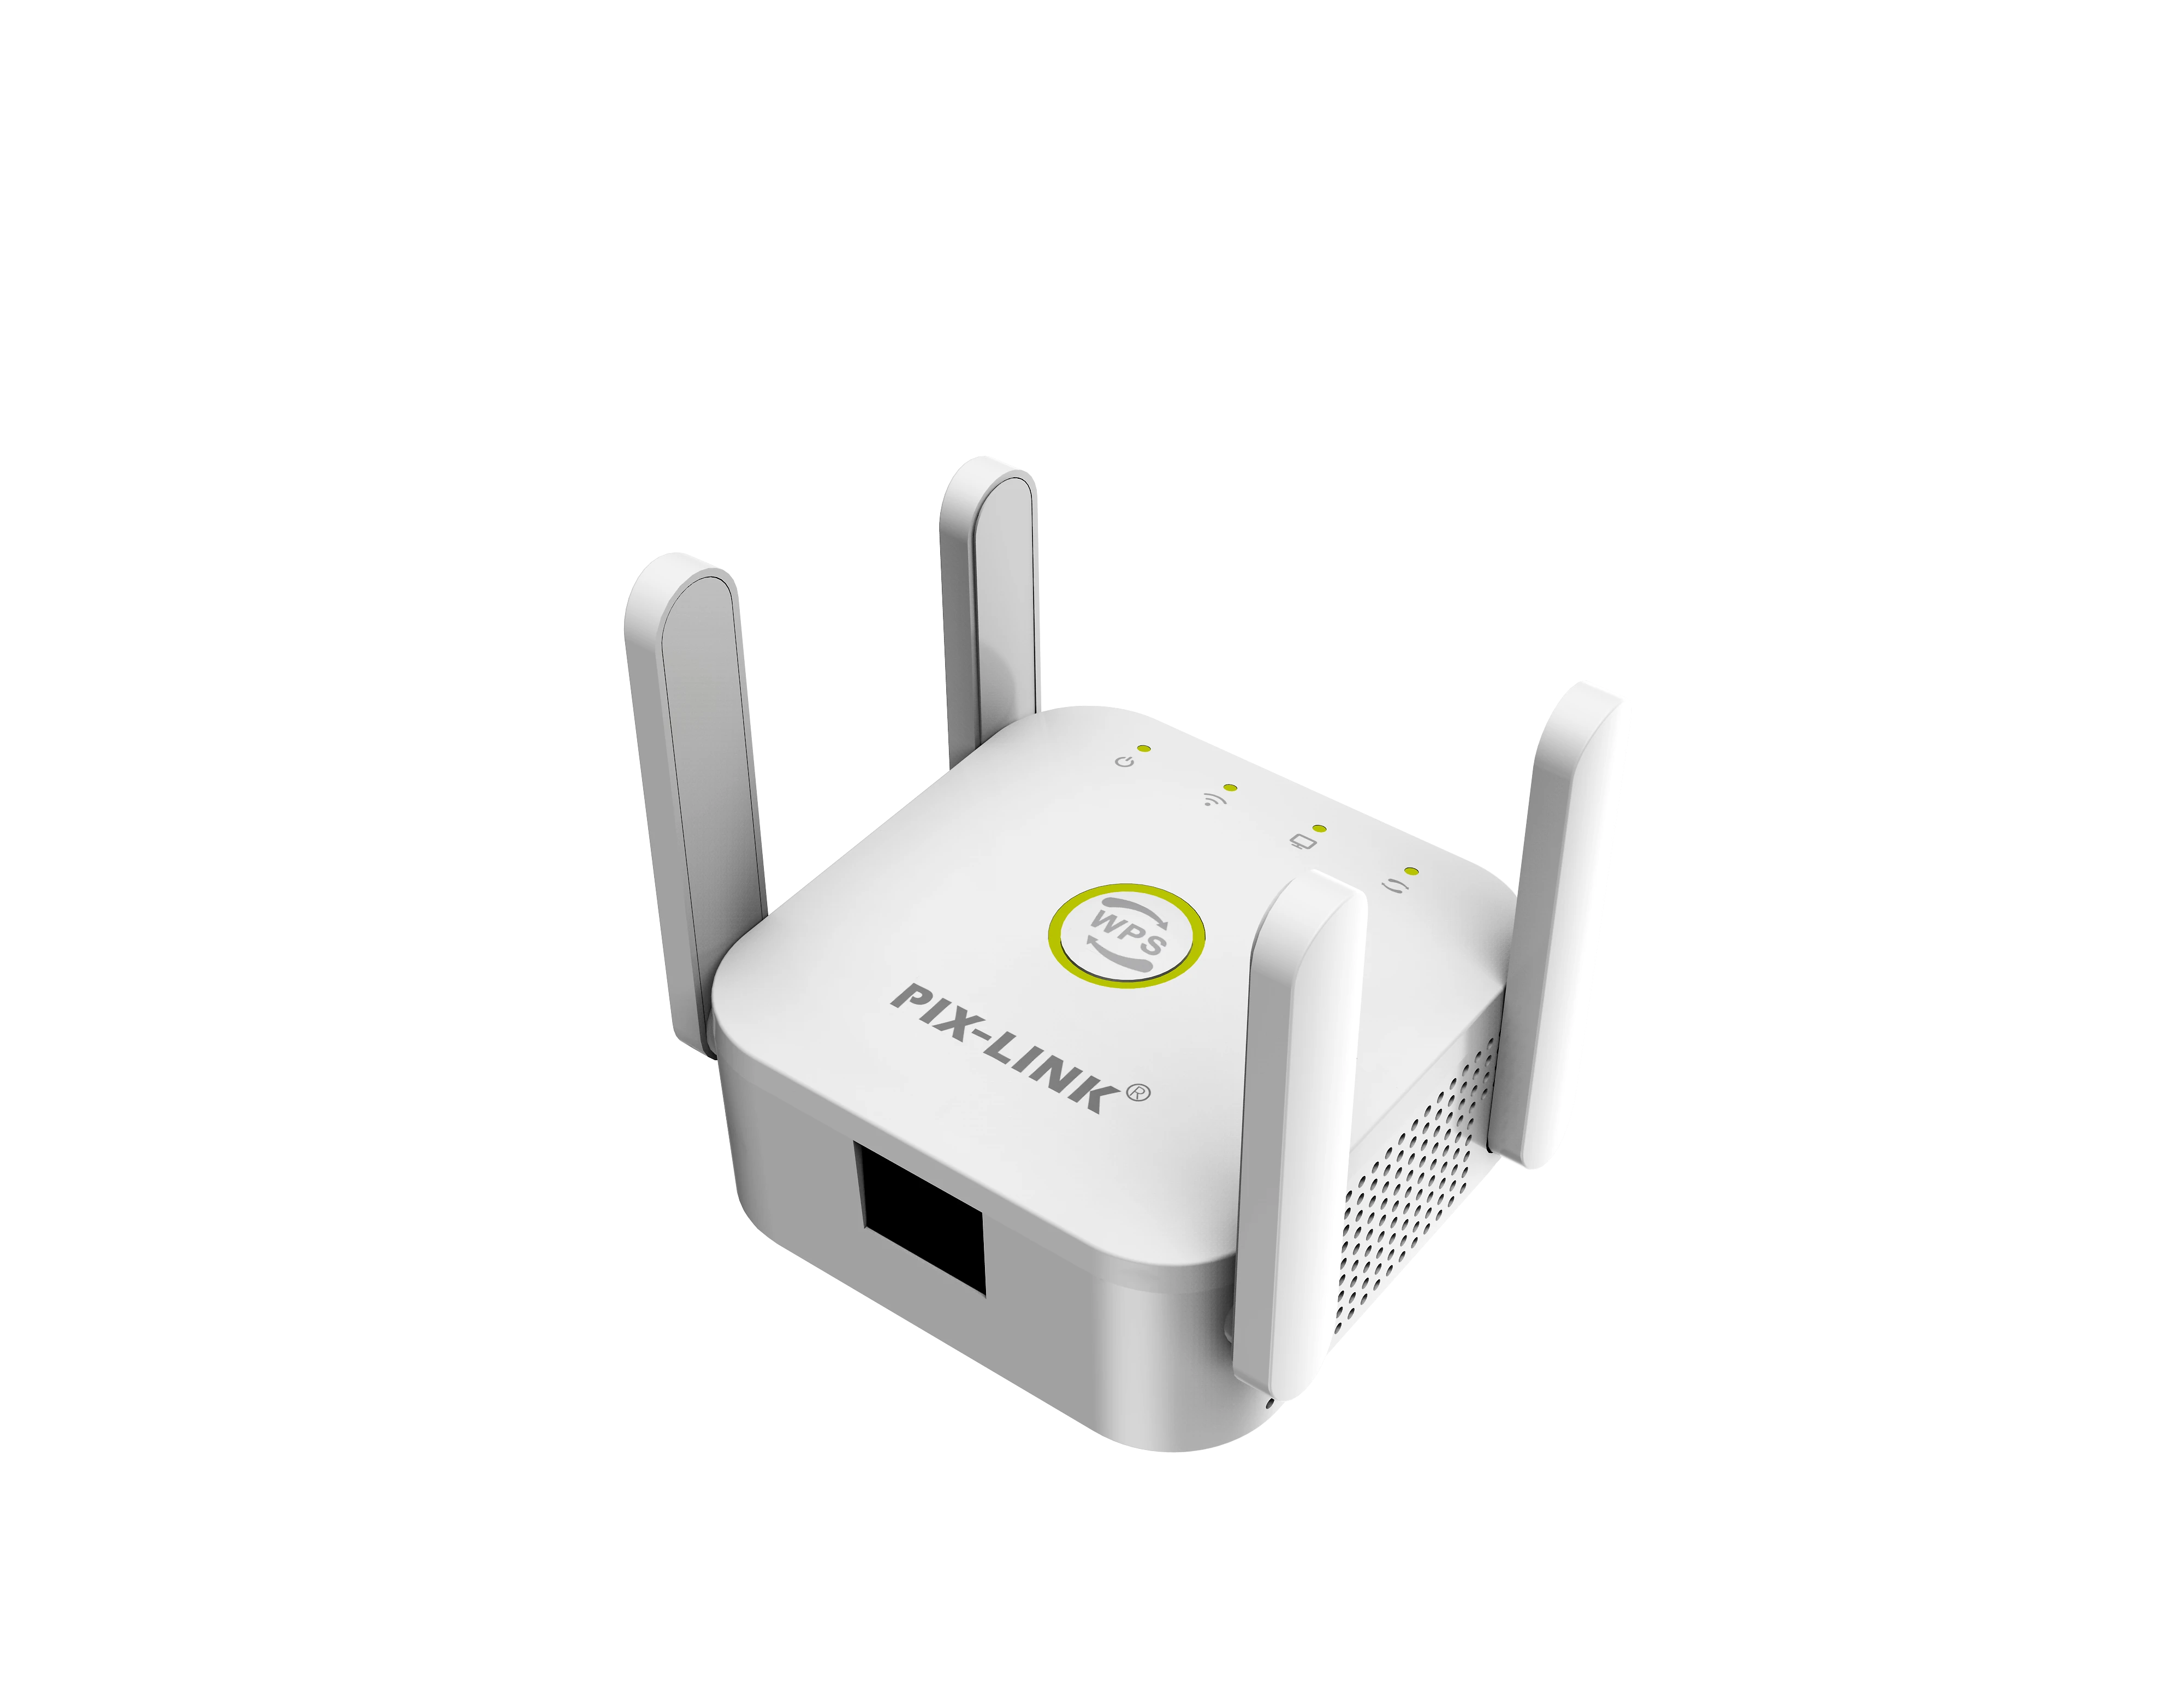 PIX LINK LV-WR24Q 300Mbps Wireless-N Wireless-N WiFi Repeater/Router/AP total black wifi extender booster factory manufactor